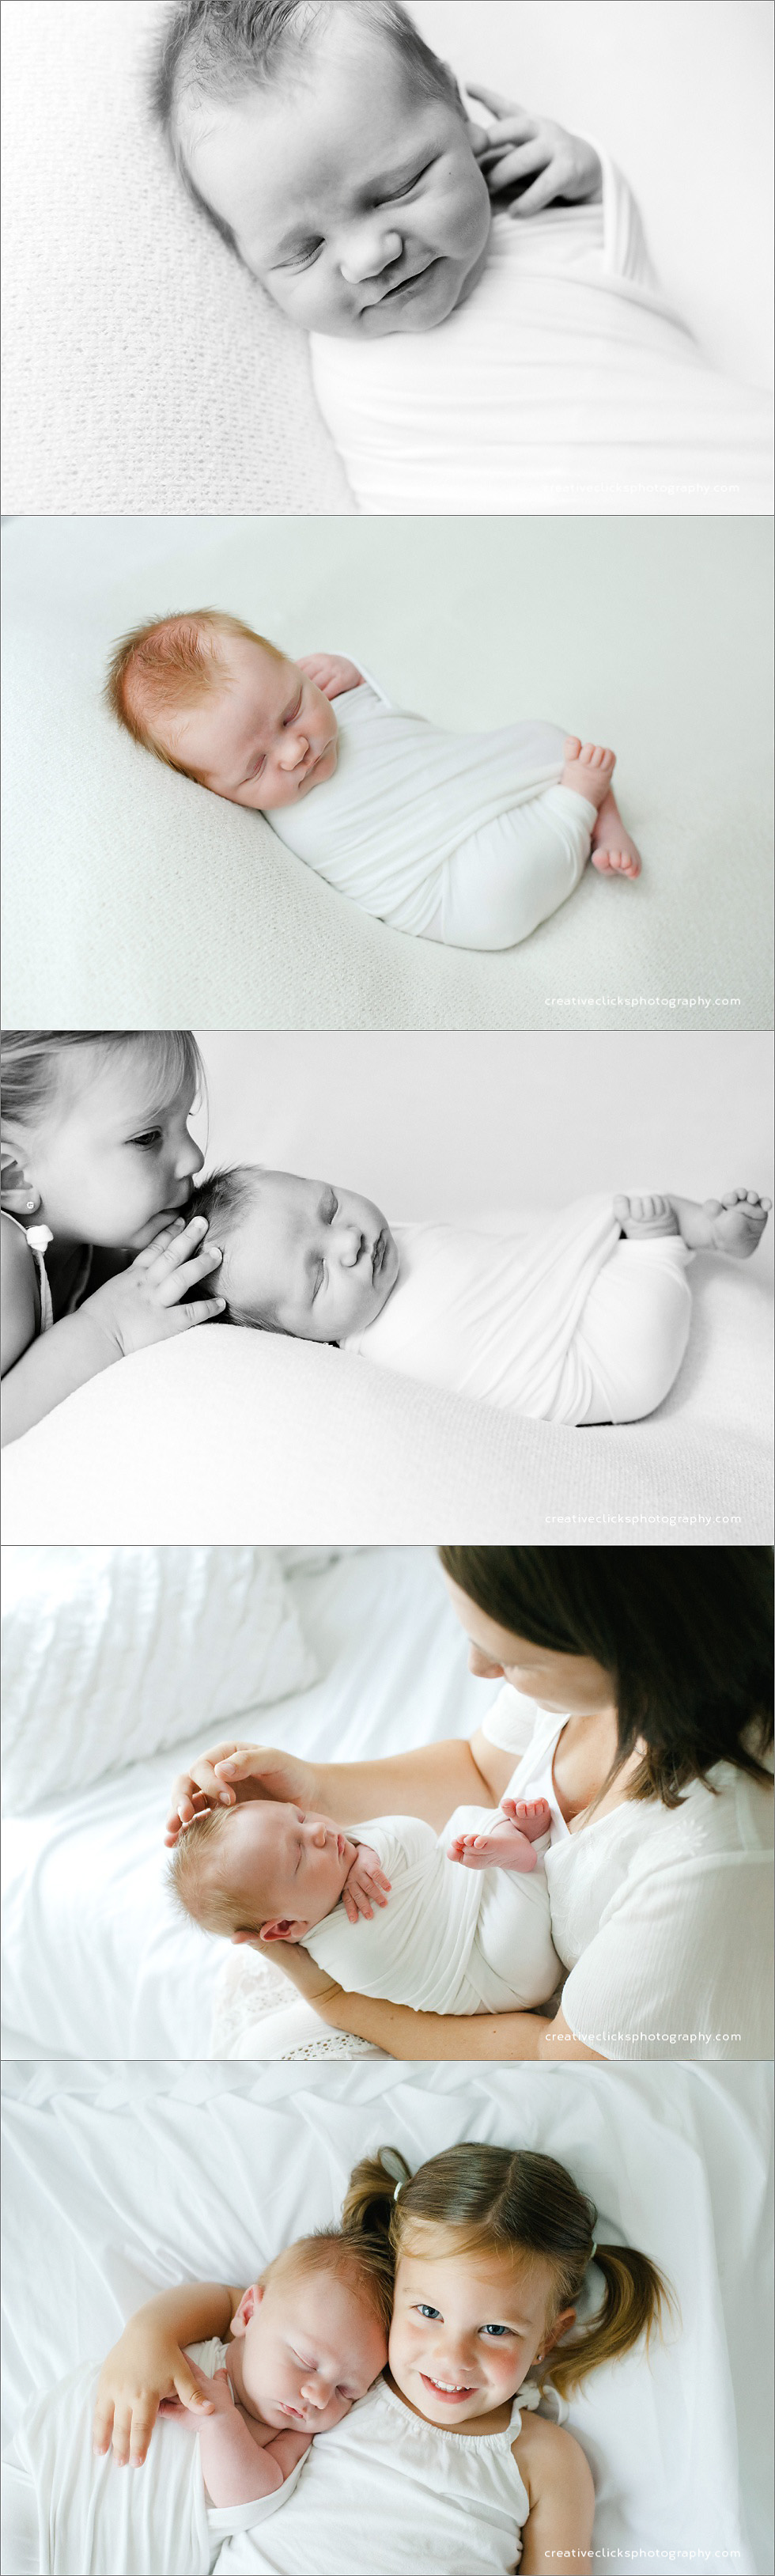 newborn baby and sibling pictures